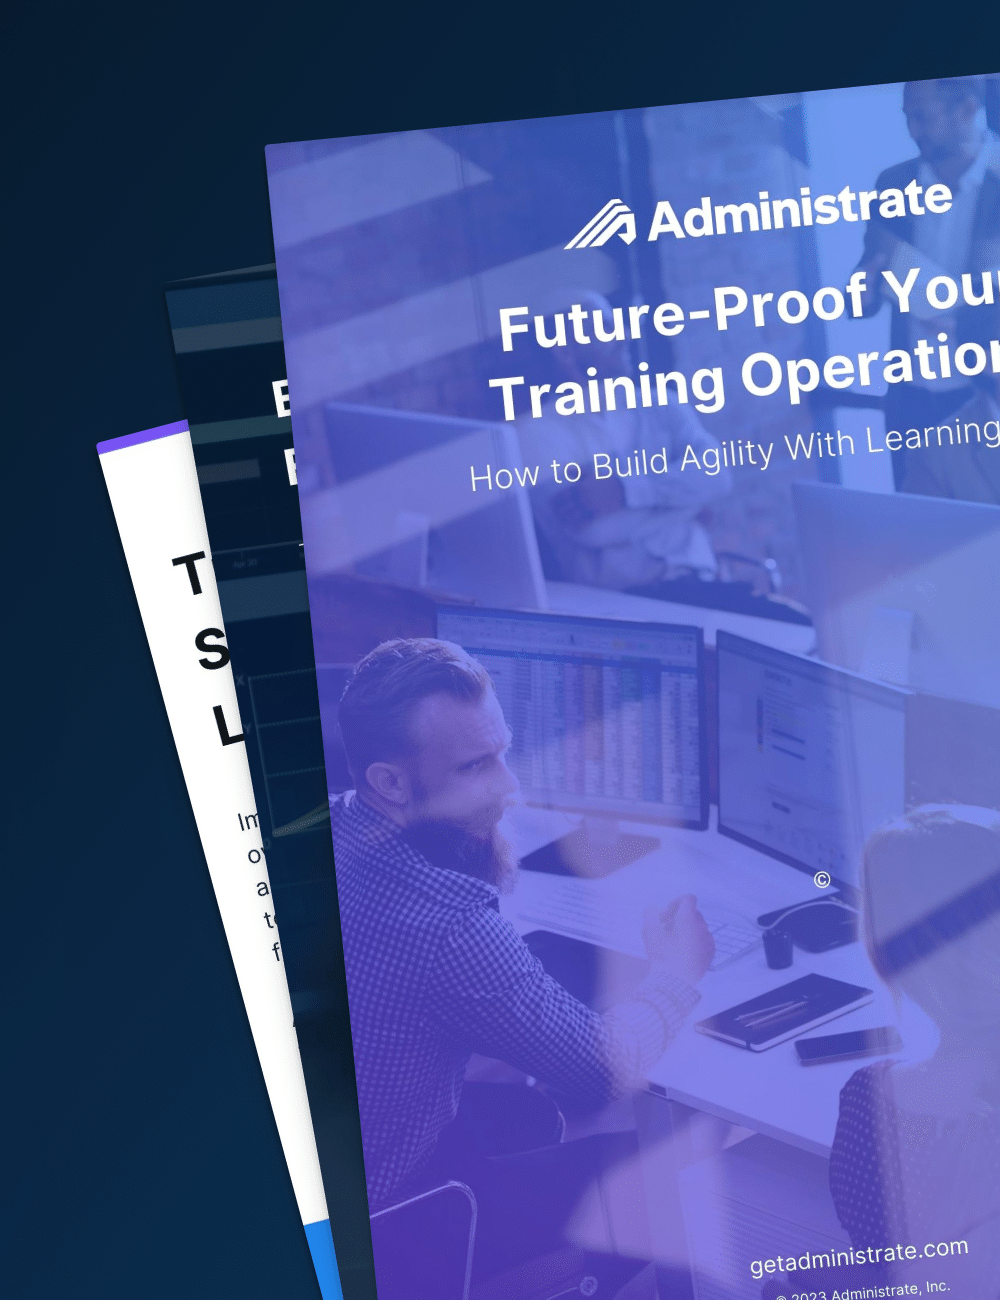 Several pages of the Future-Proof Your Training Operations guide fanned out.